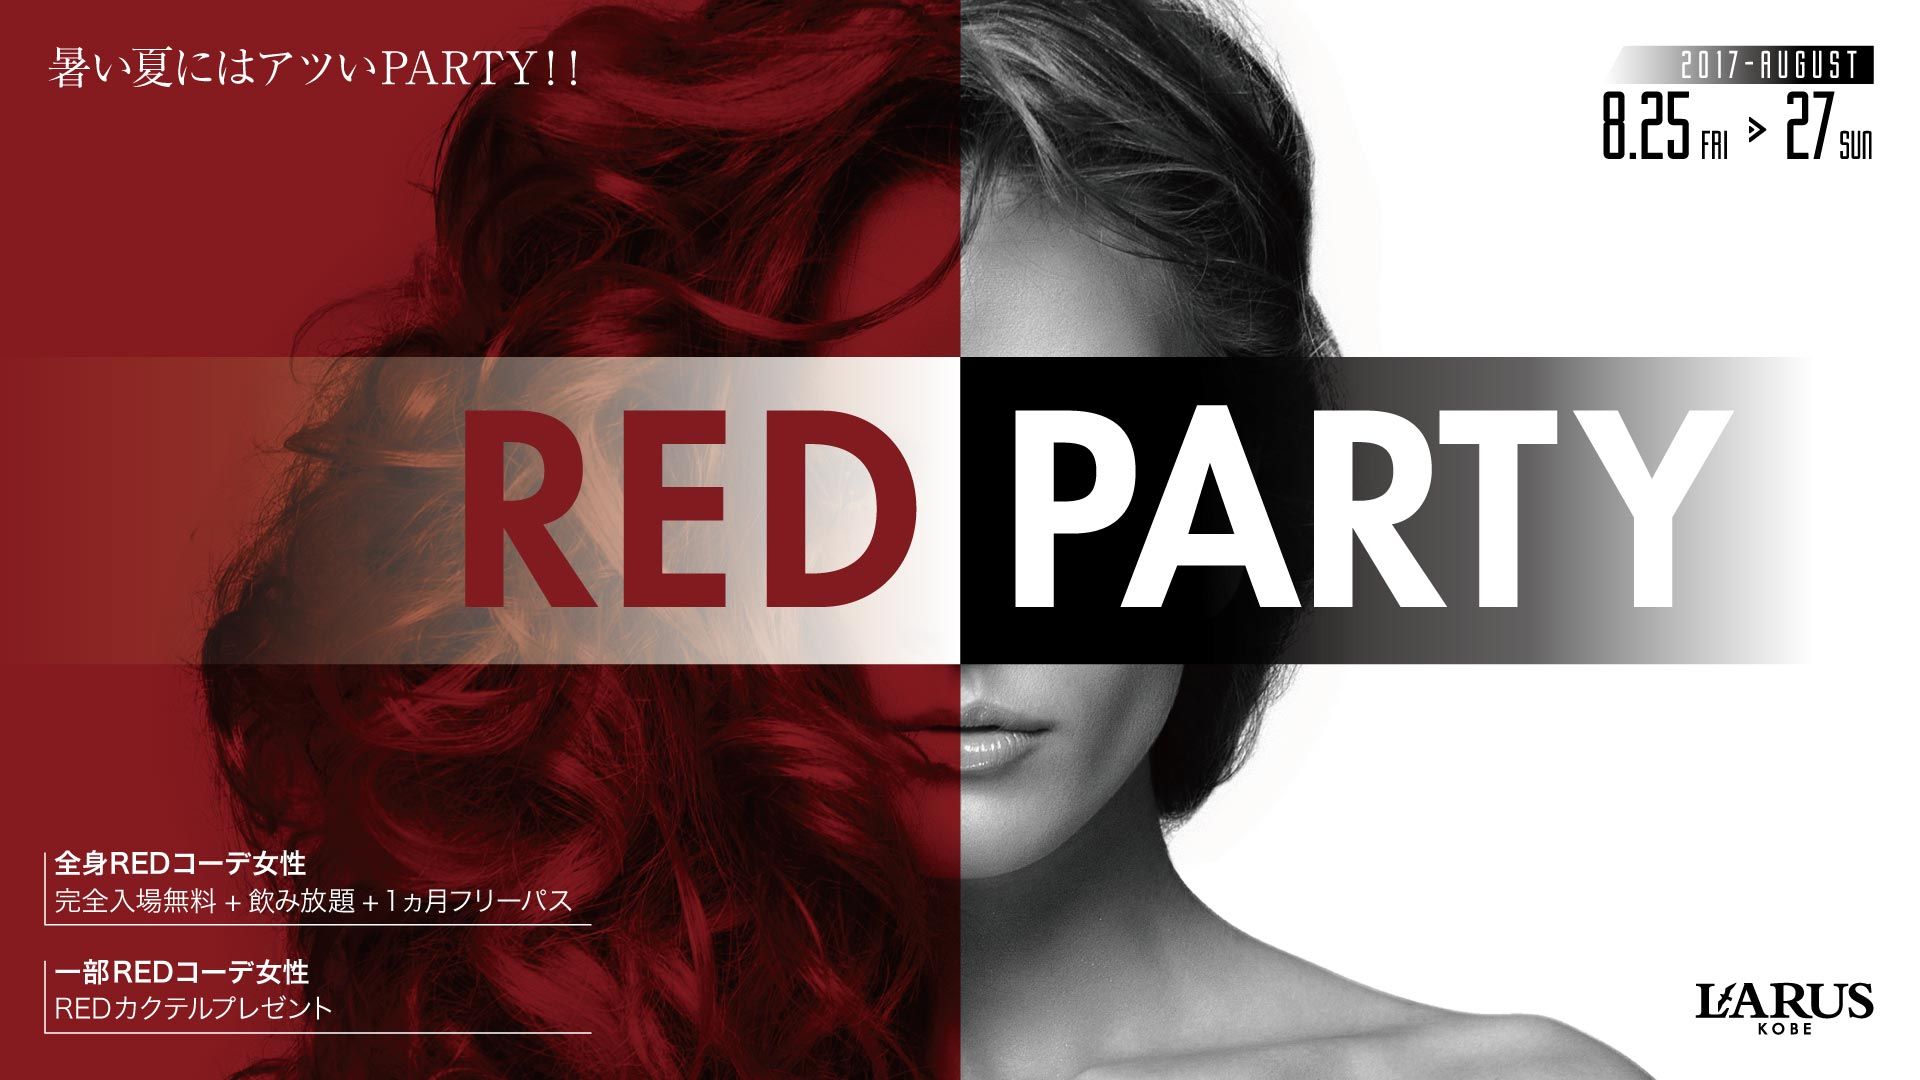 RED PARTY / FRIDAY BEST MIX 神戸